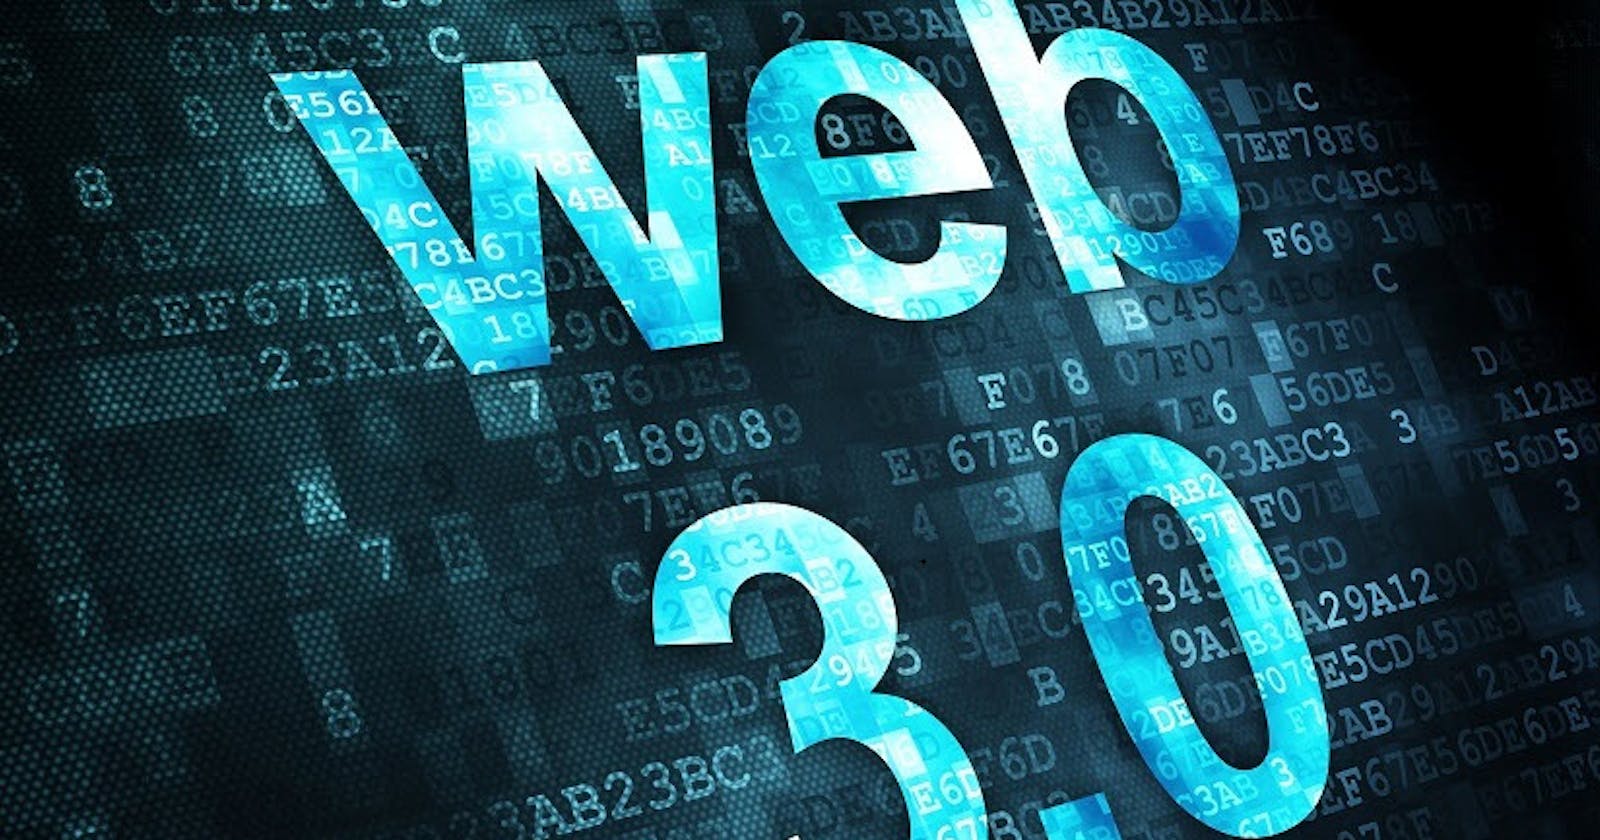 Transitioning to Web 3.0